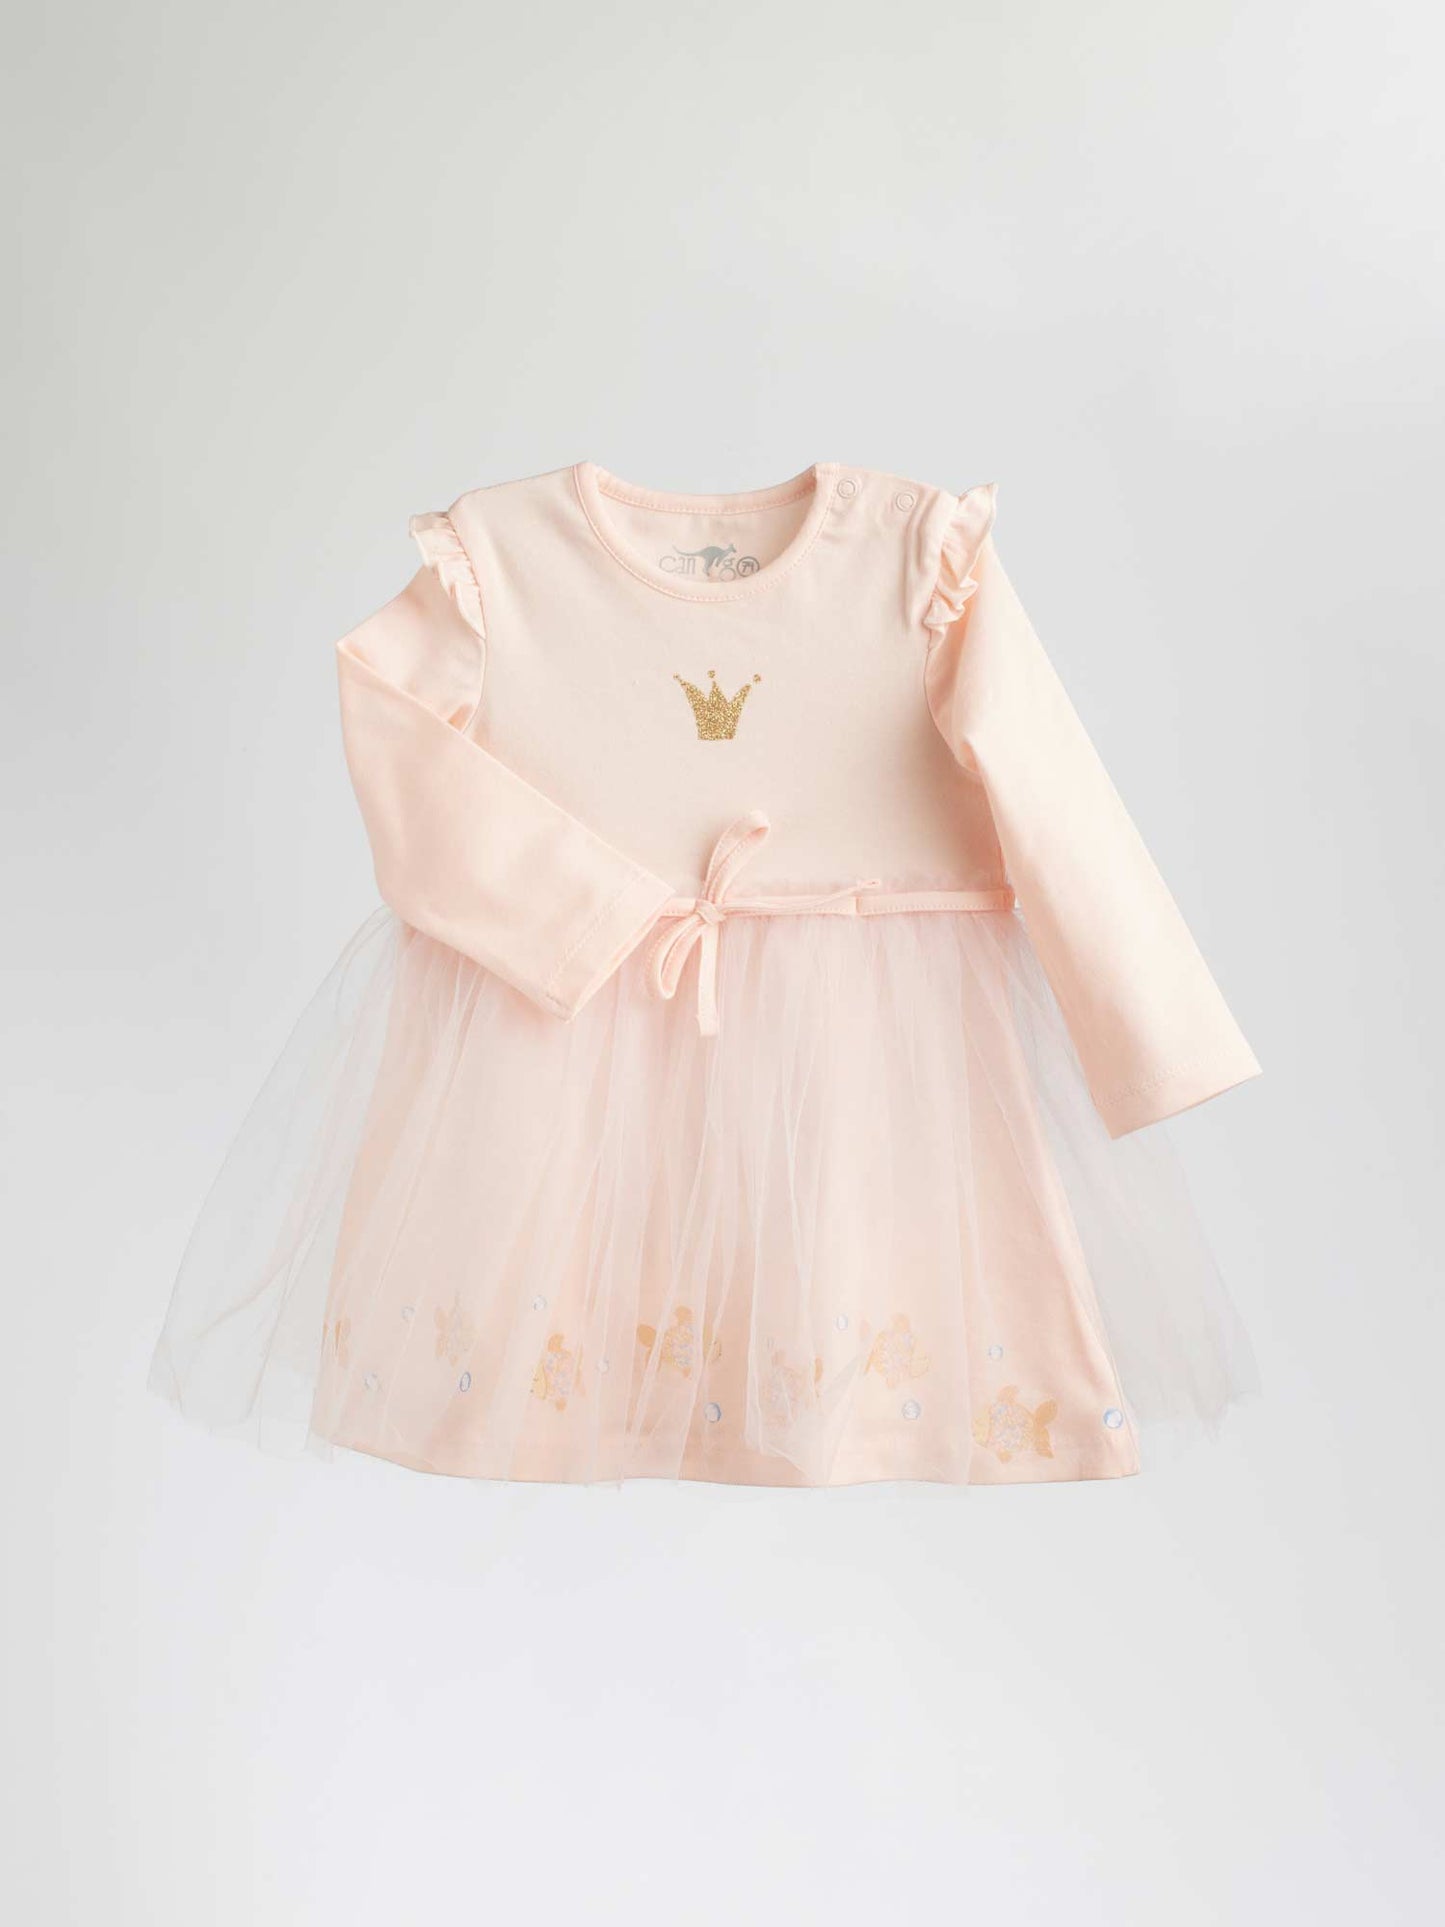 Little fashionistas can stay comfortable and stylish in the Baby Dress Gold Fish 311! Crafted from a blend of soft stockinet and cotton, this dress features a cute goldfish pattern. 